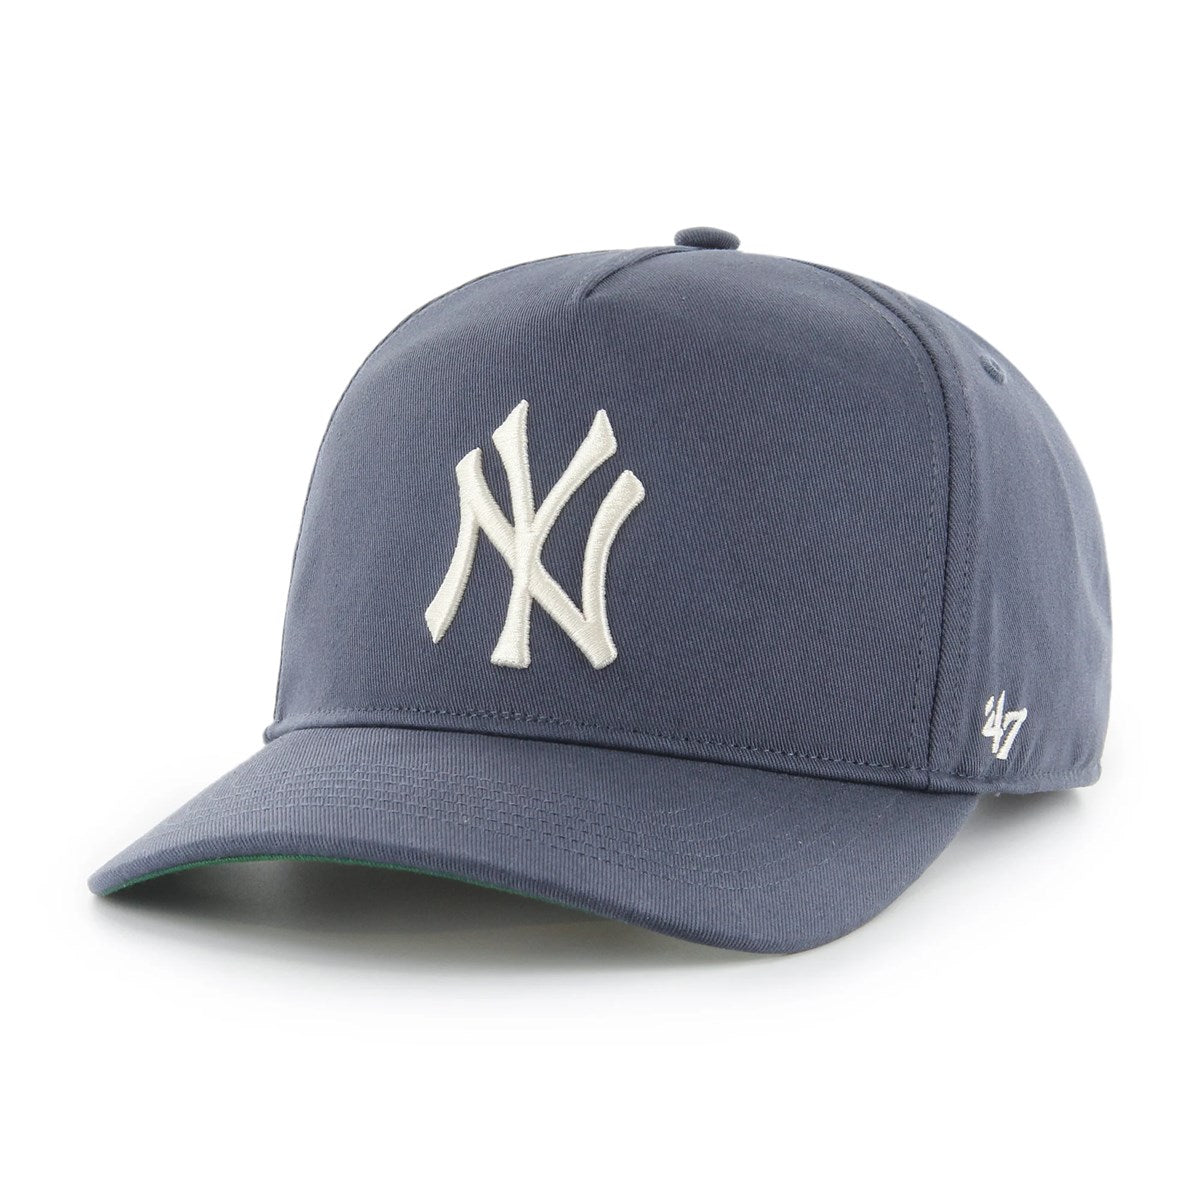 '47 BRAND New York Yankees - 47 HITCH Navy [FHTCH17GWP]